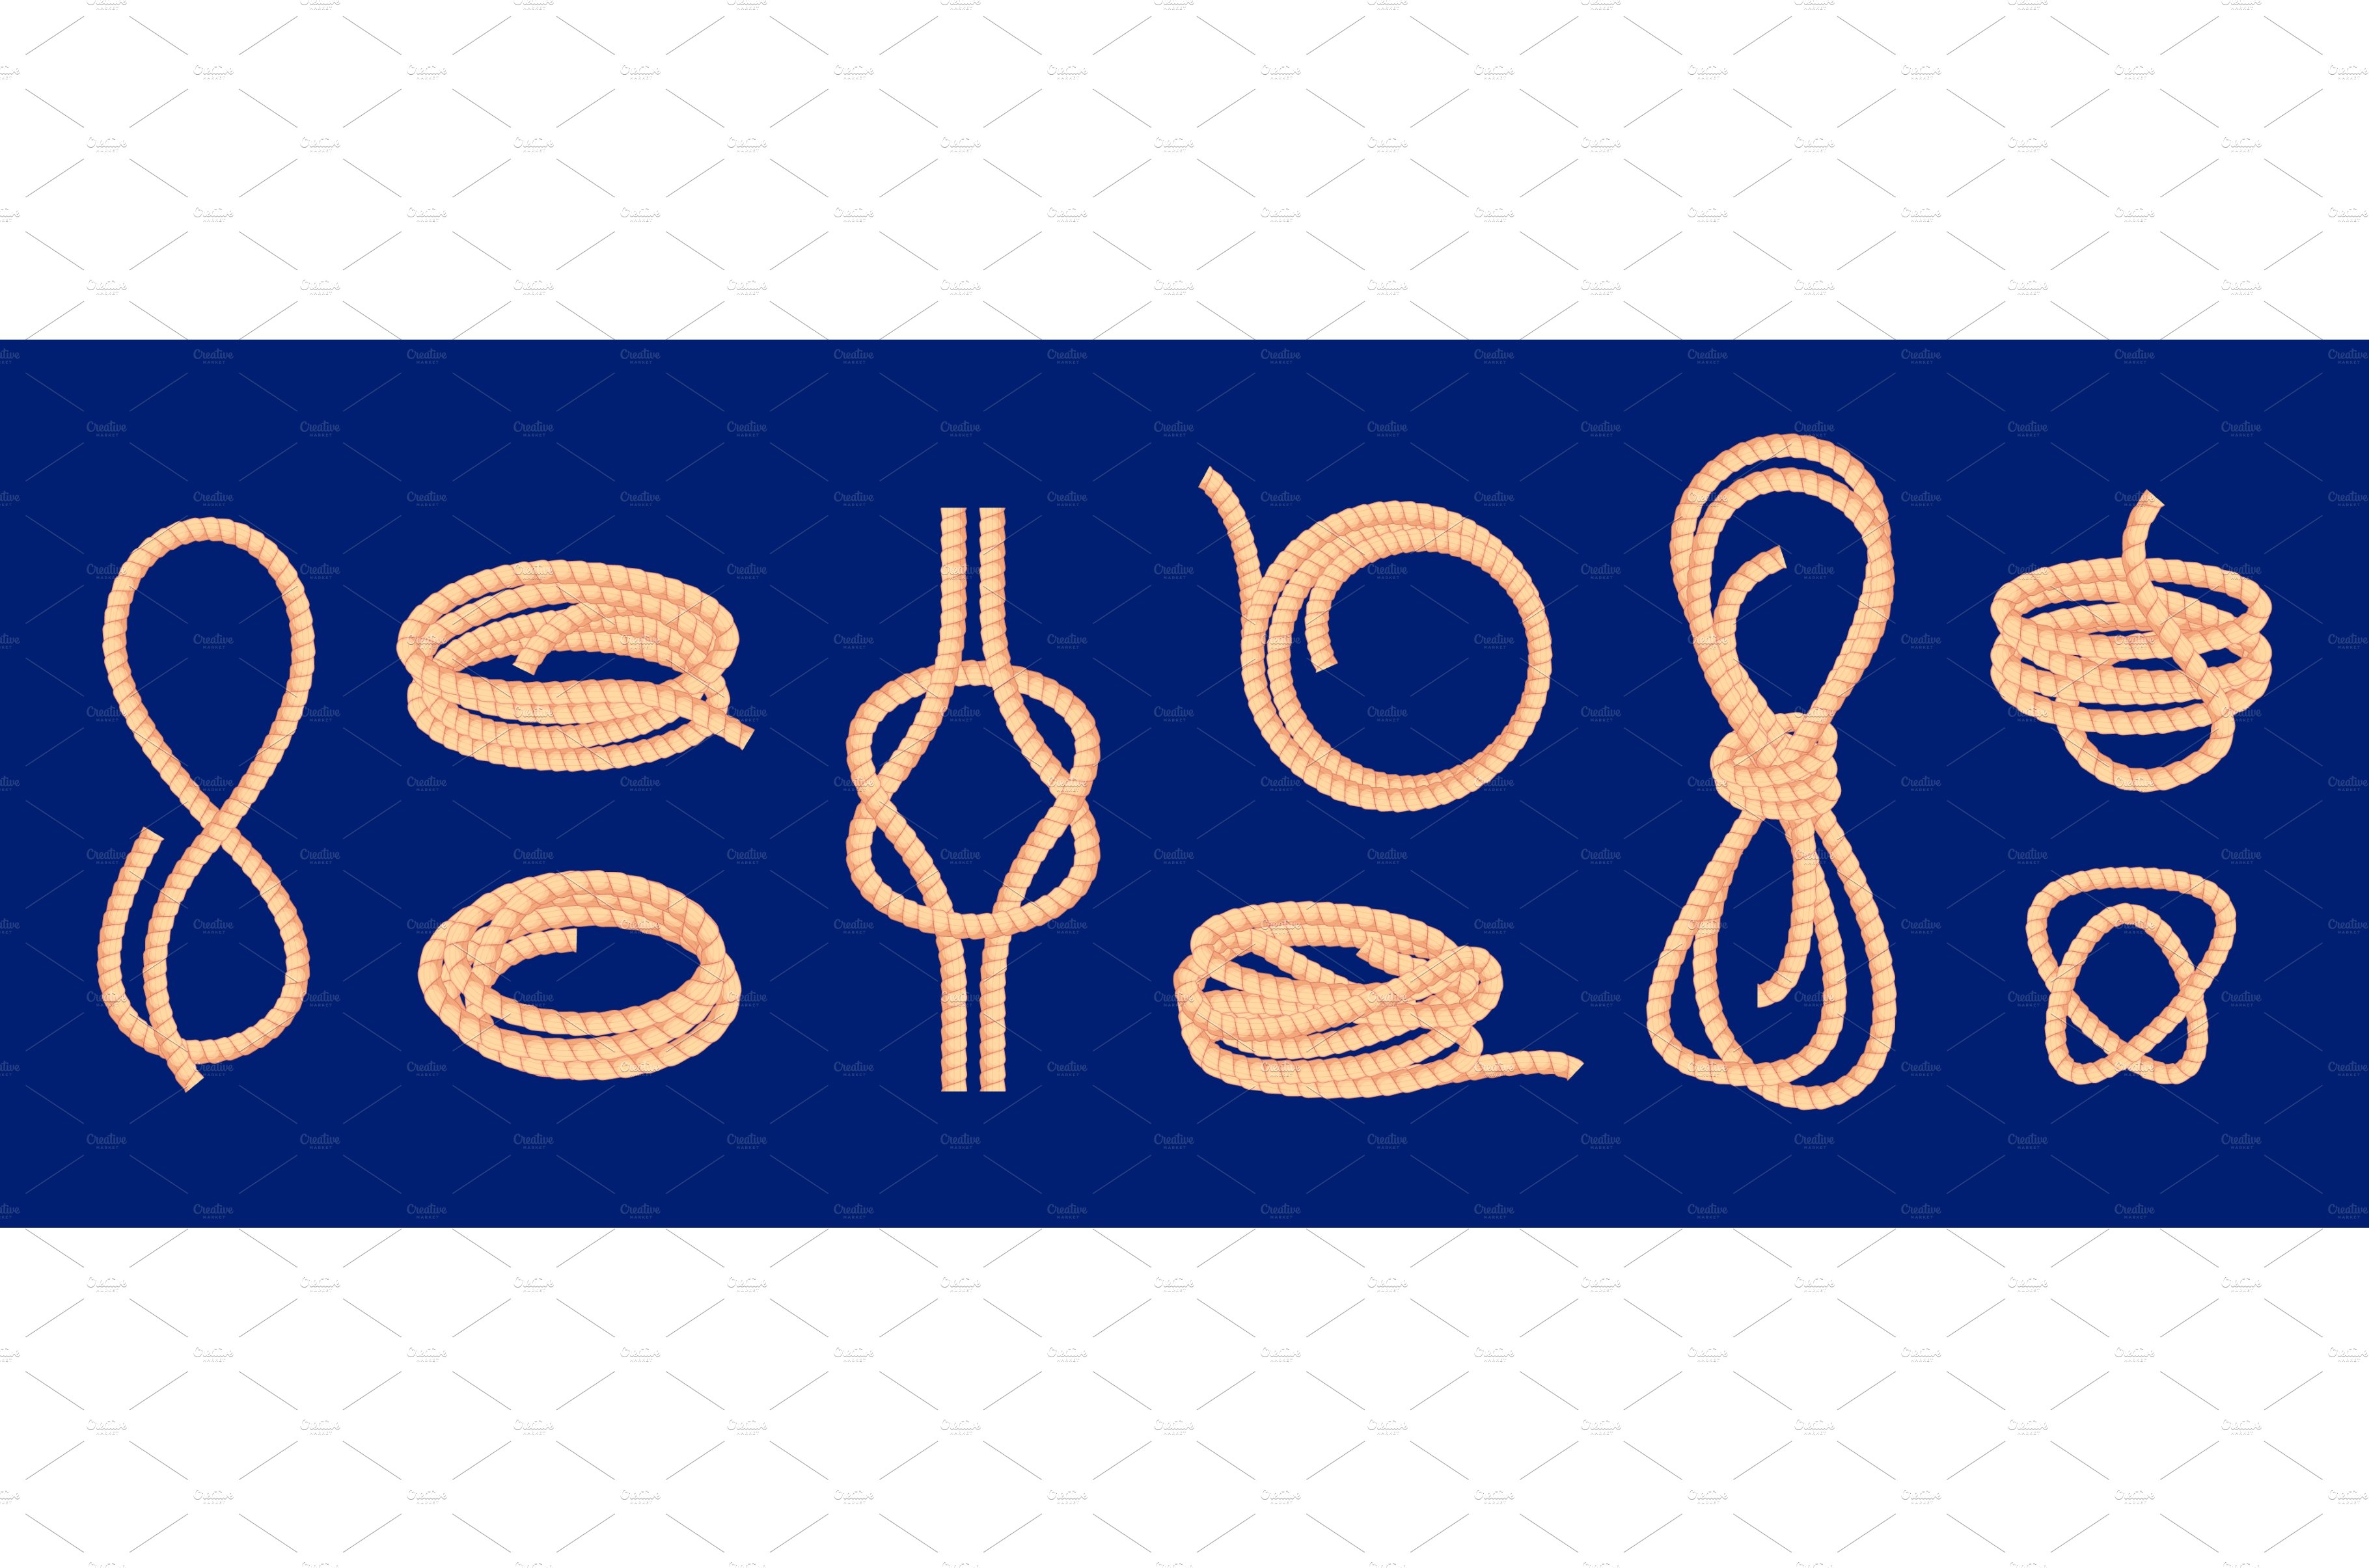 Folded ropes. Sketch trimming icons cover image.